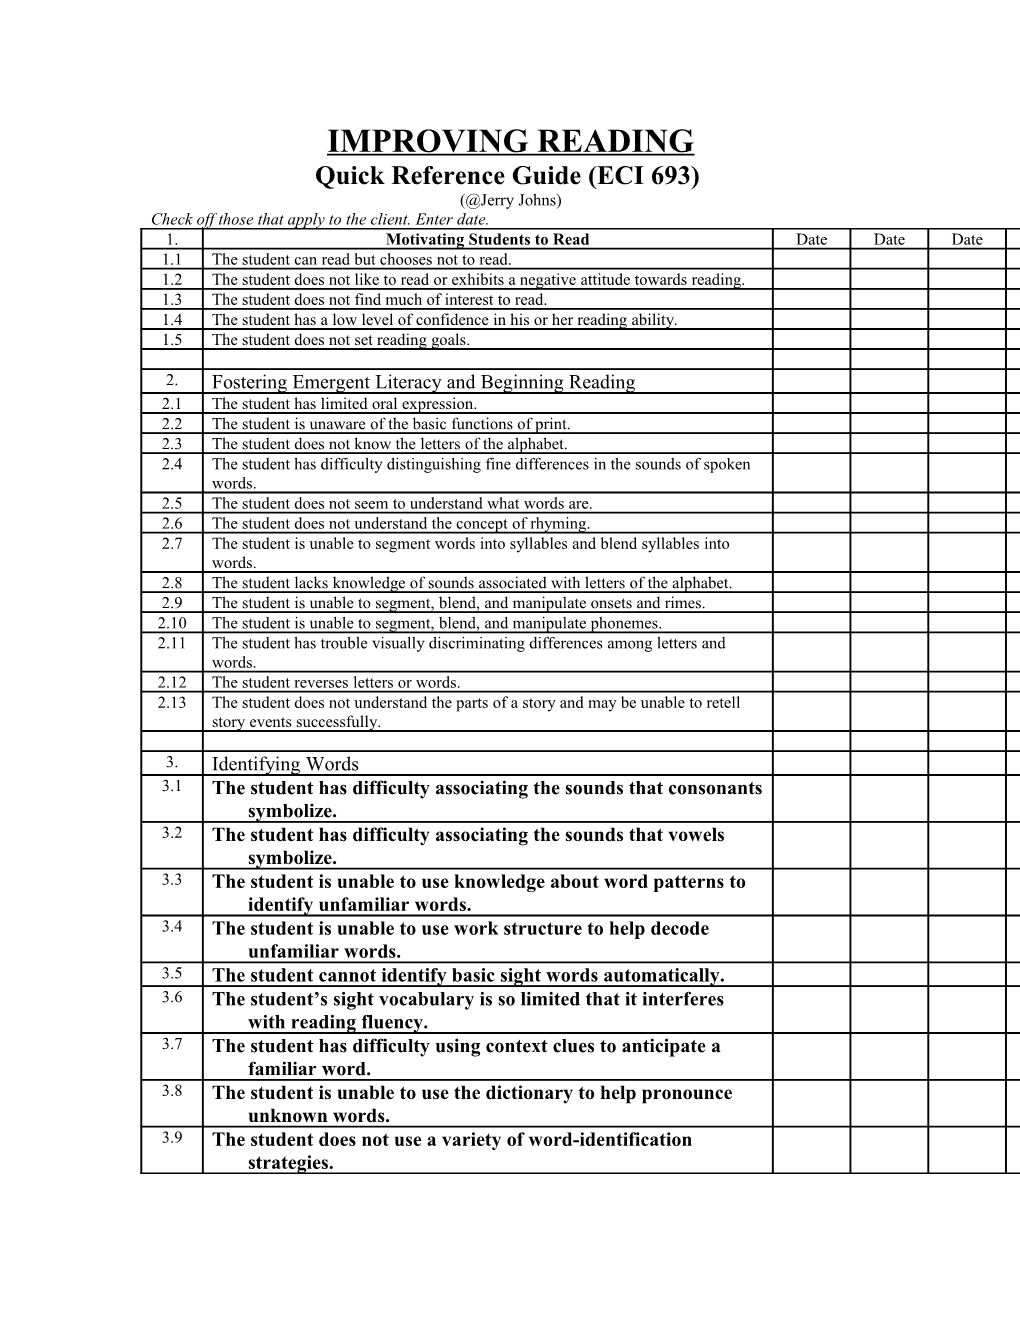 Quick Reference Guide (ECI 693)